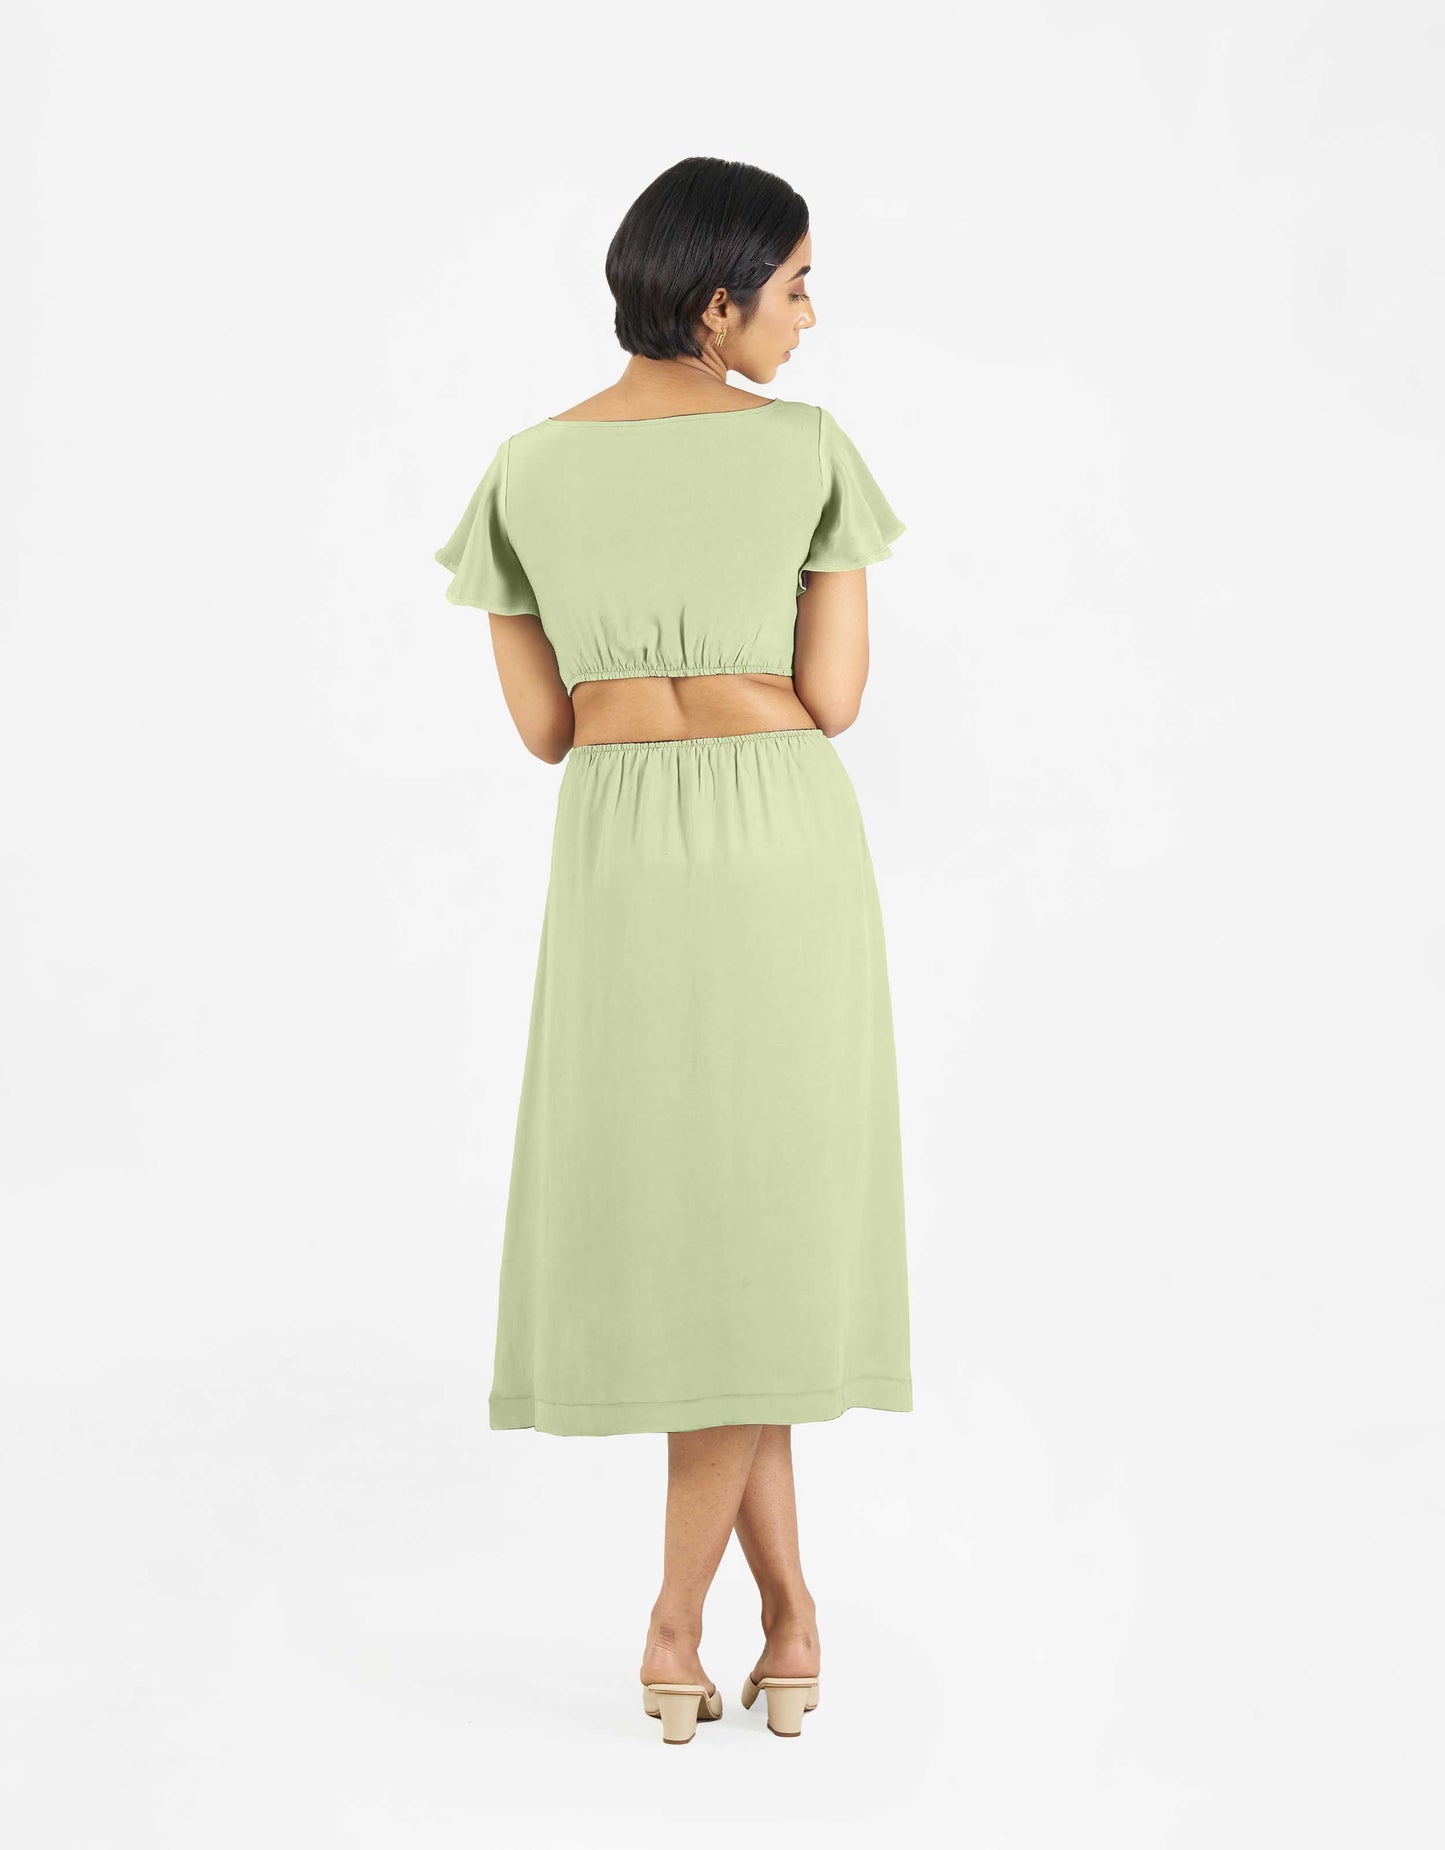 Back view of Hueloom's Reversible Cut-out dress in mint green.